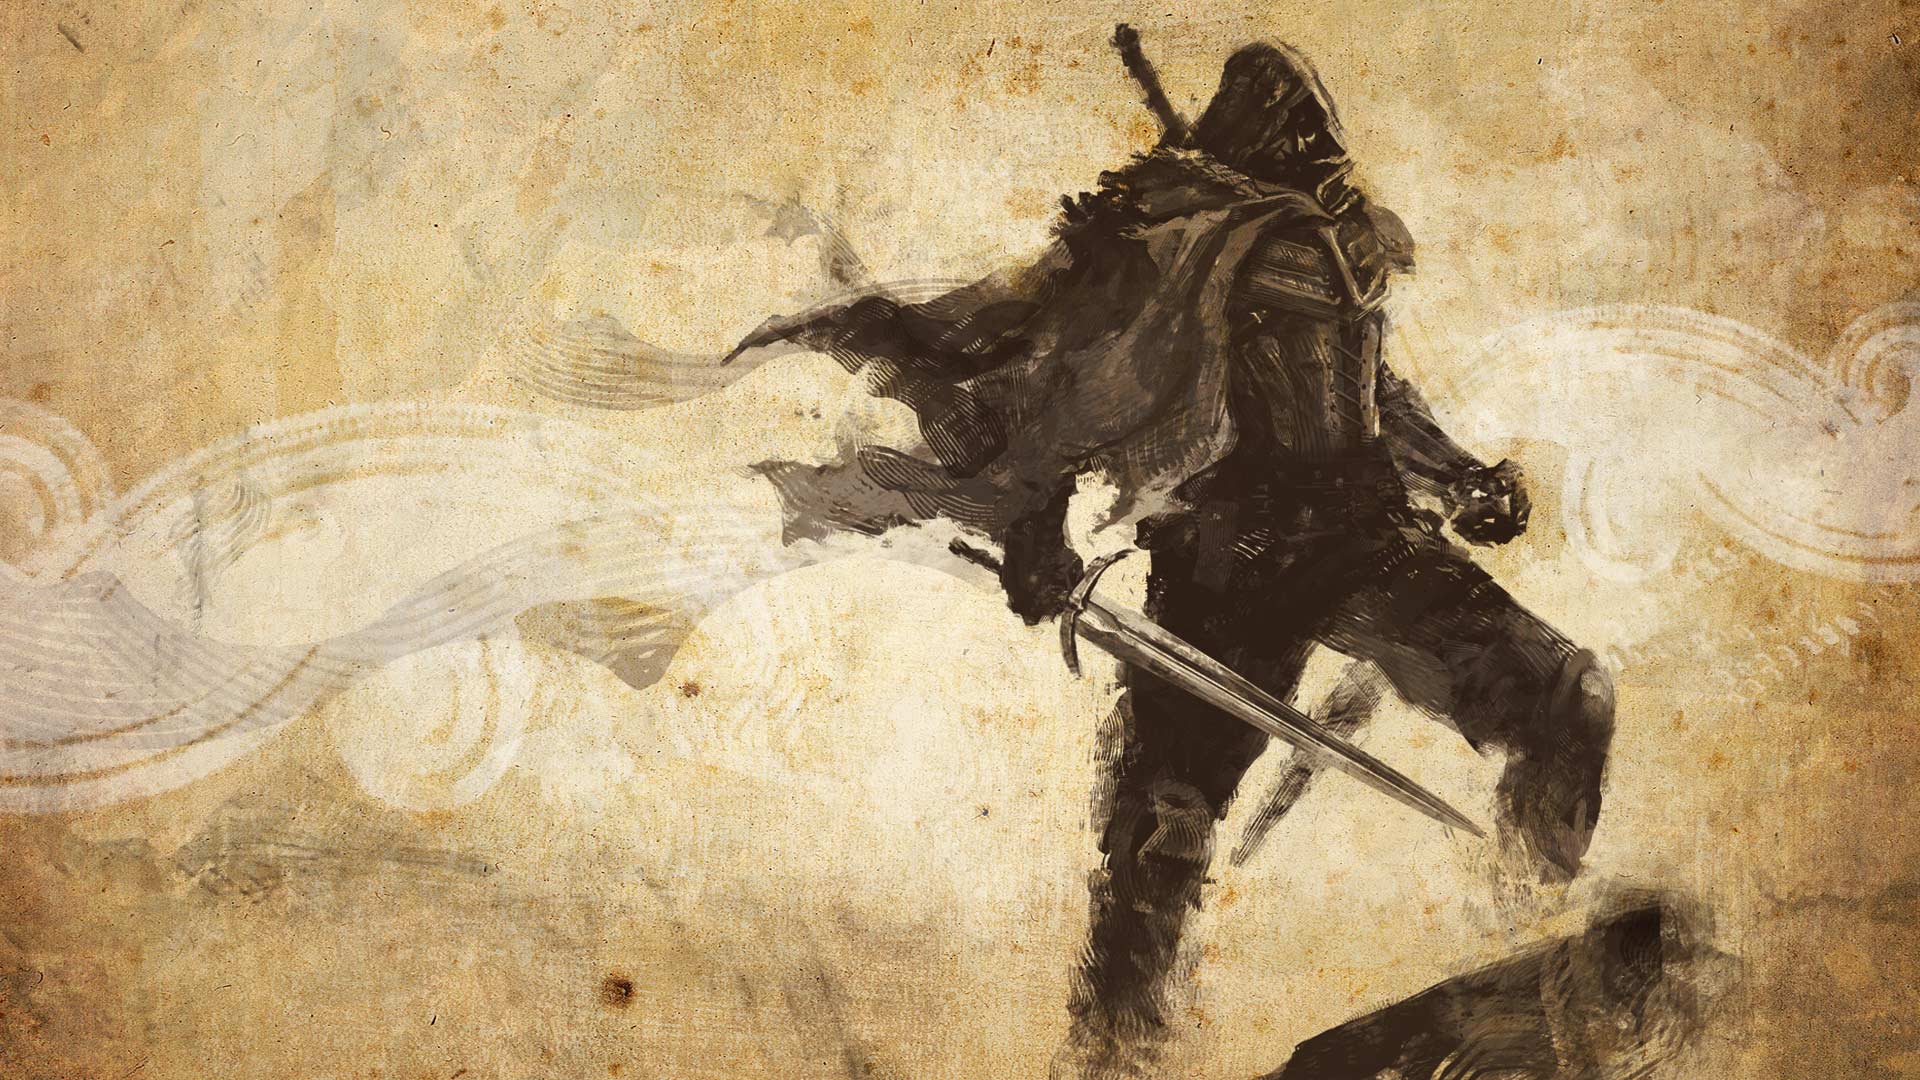 Download mobile wallpaper Warrior, Sword, Cloak, Video Game, Concept Art, Joe Dever's Lone Wolf Hd Remastered for free.